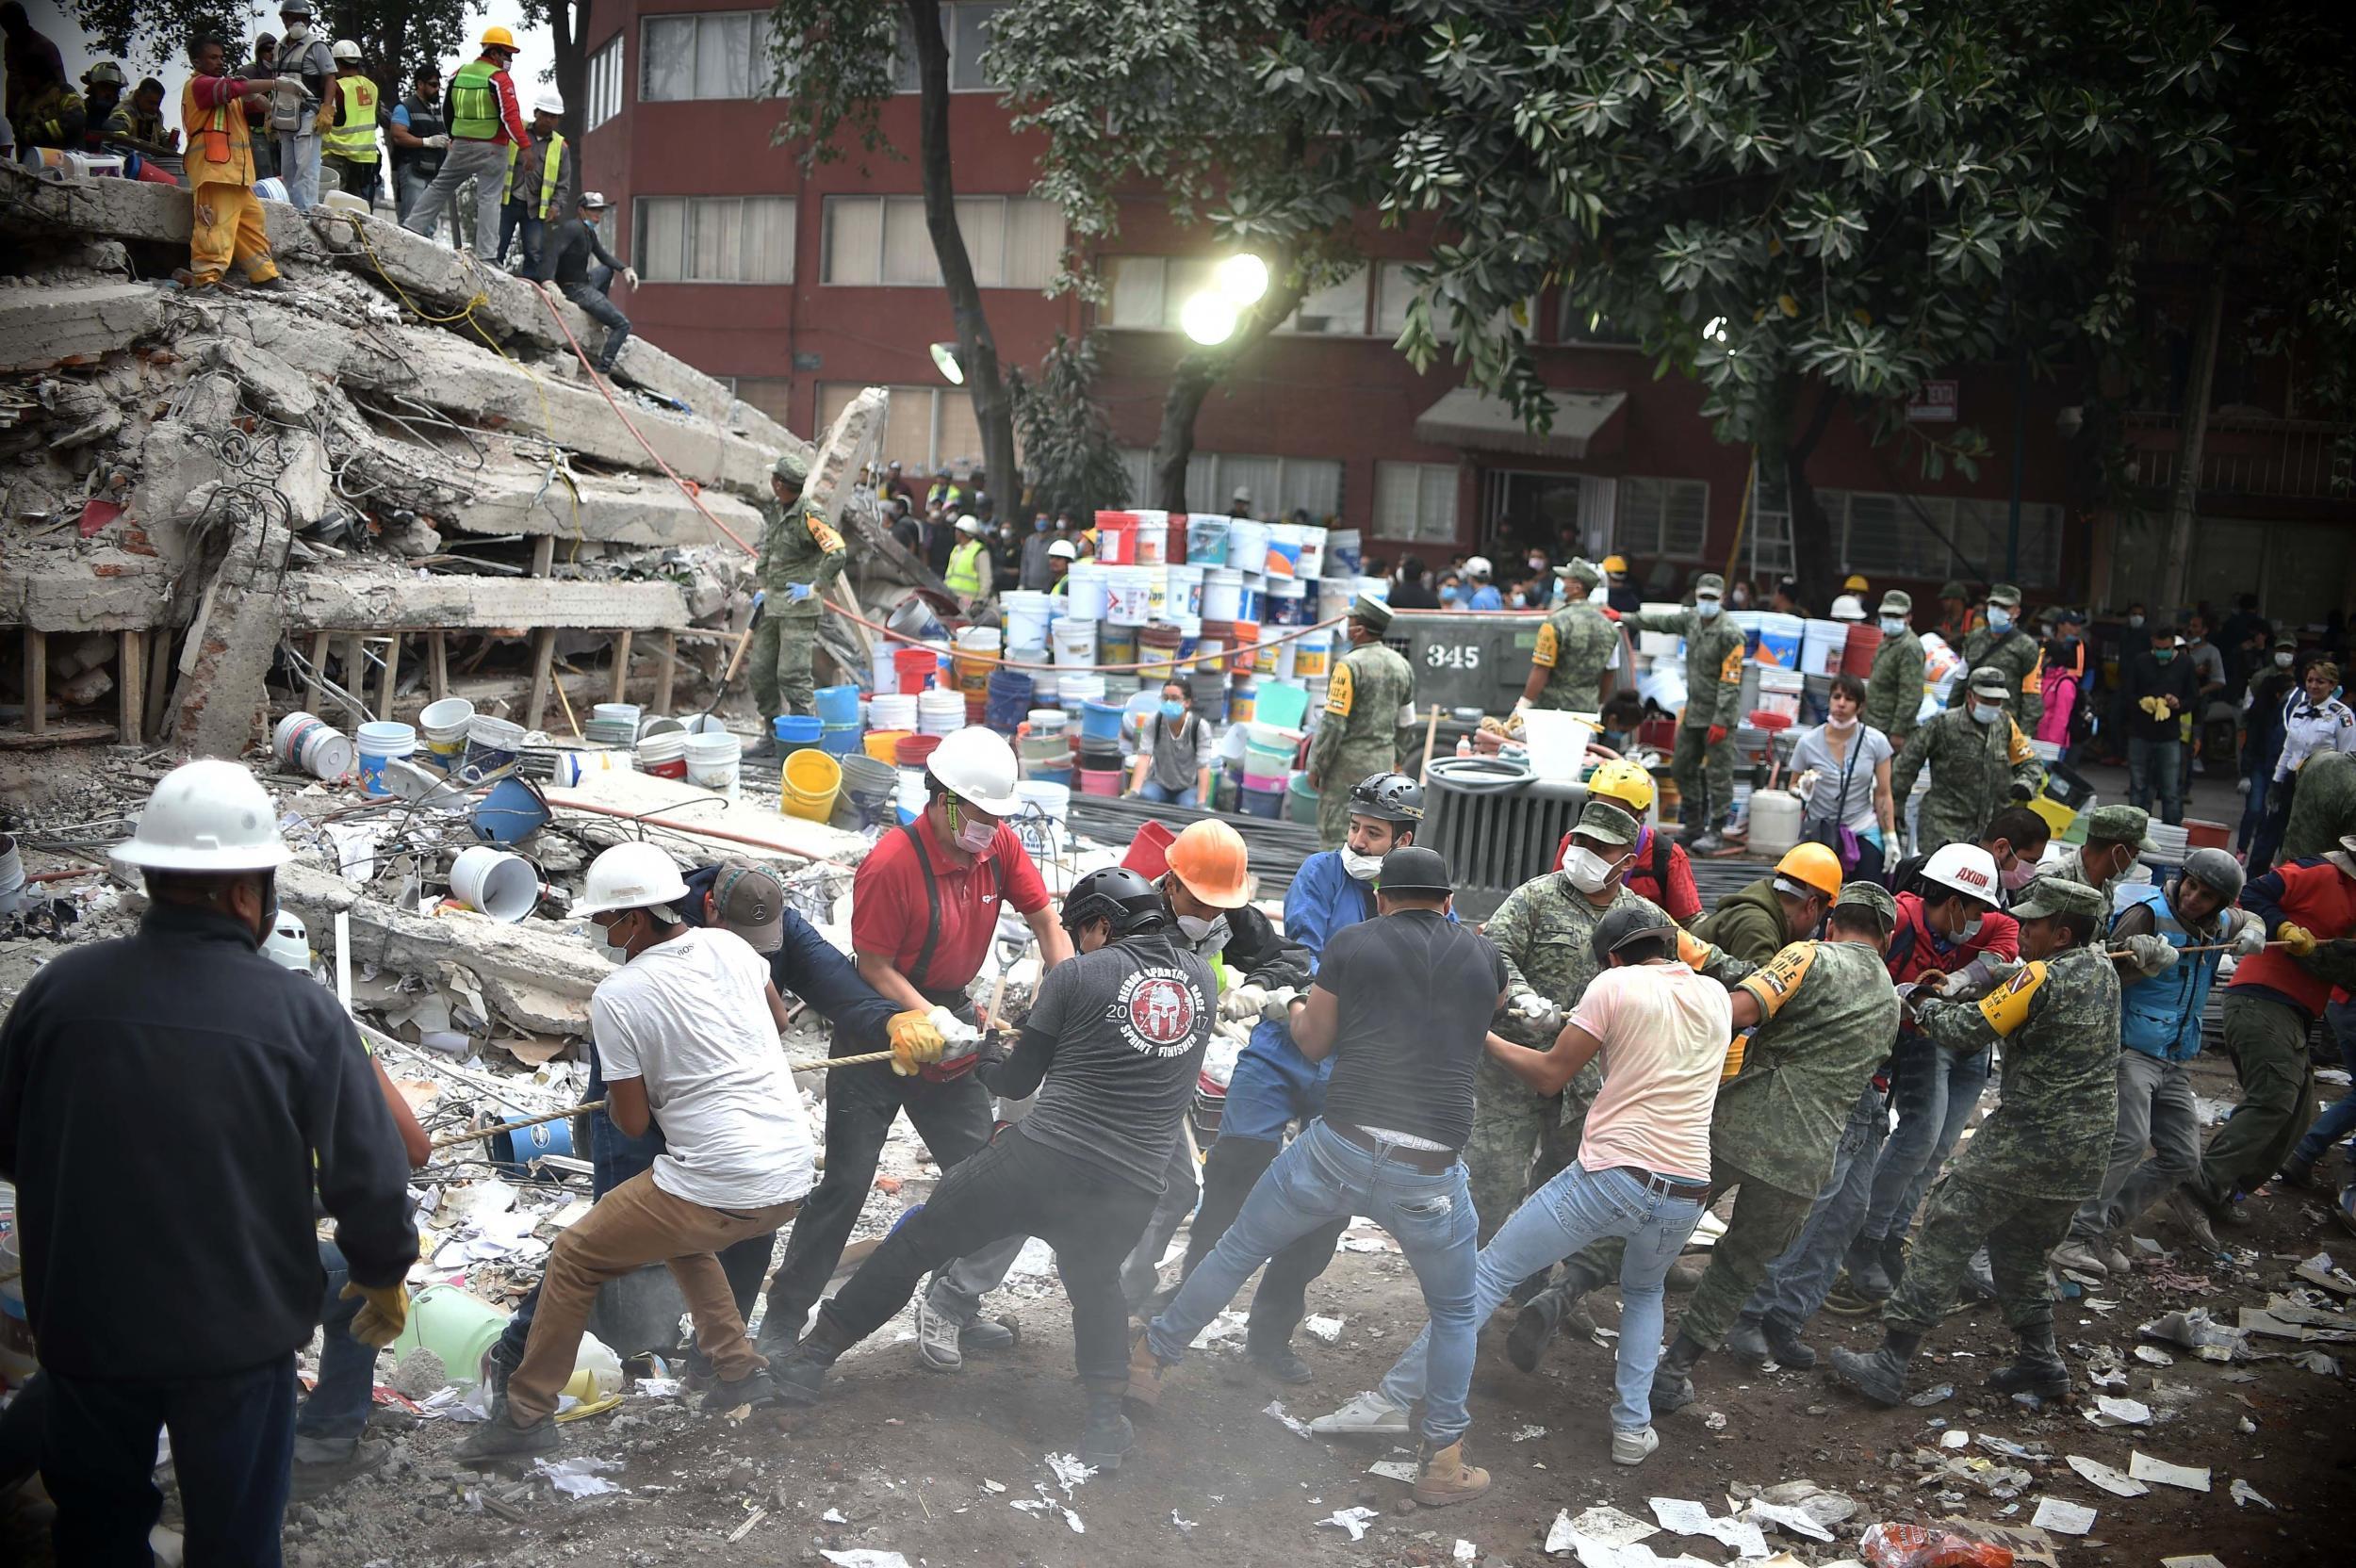 Rescuers, firefighters, policemen, soldiers and volunteers search for survivors in a flattened building in Mexico City